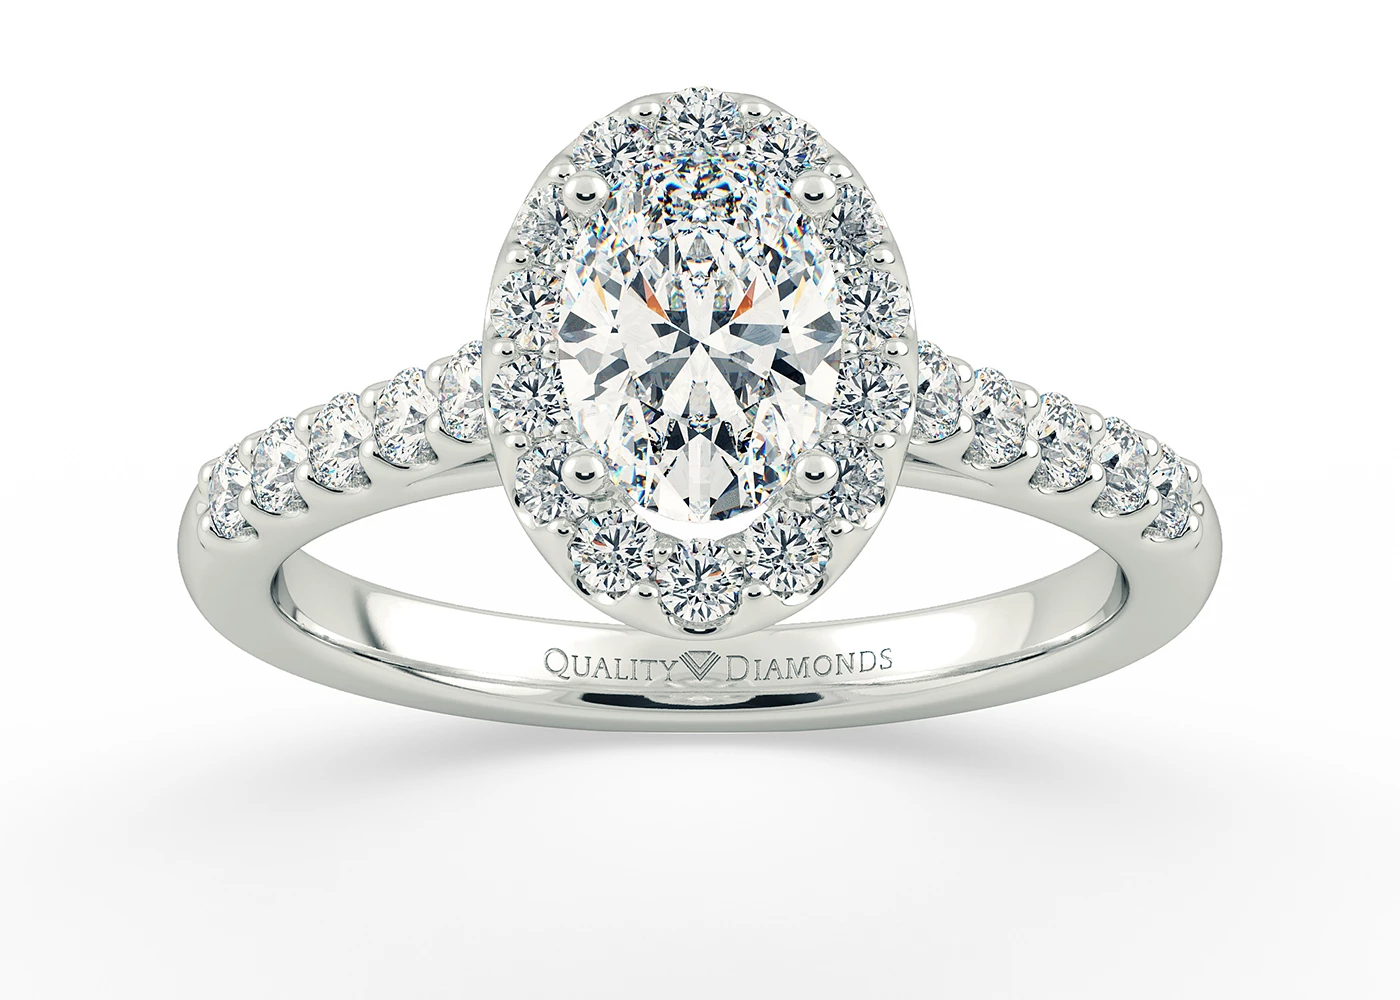 One Carat Oval Halo Diamond Ring in 9K White Gold